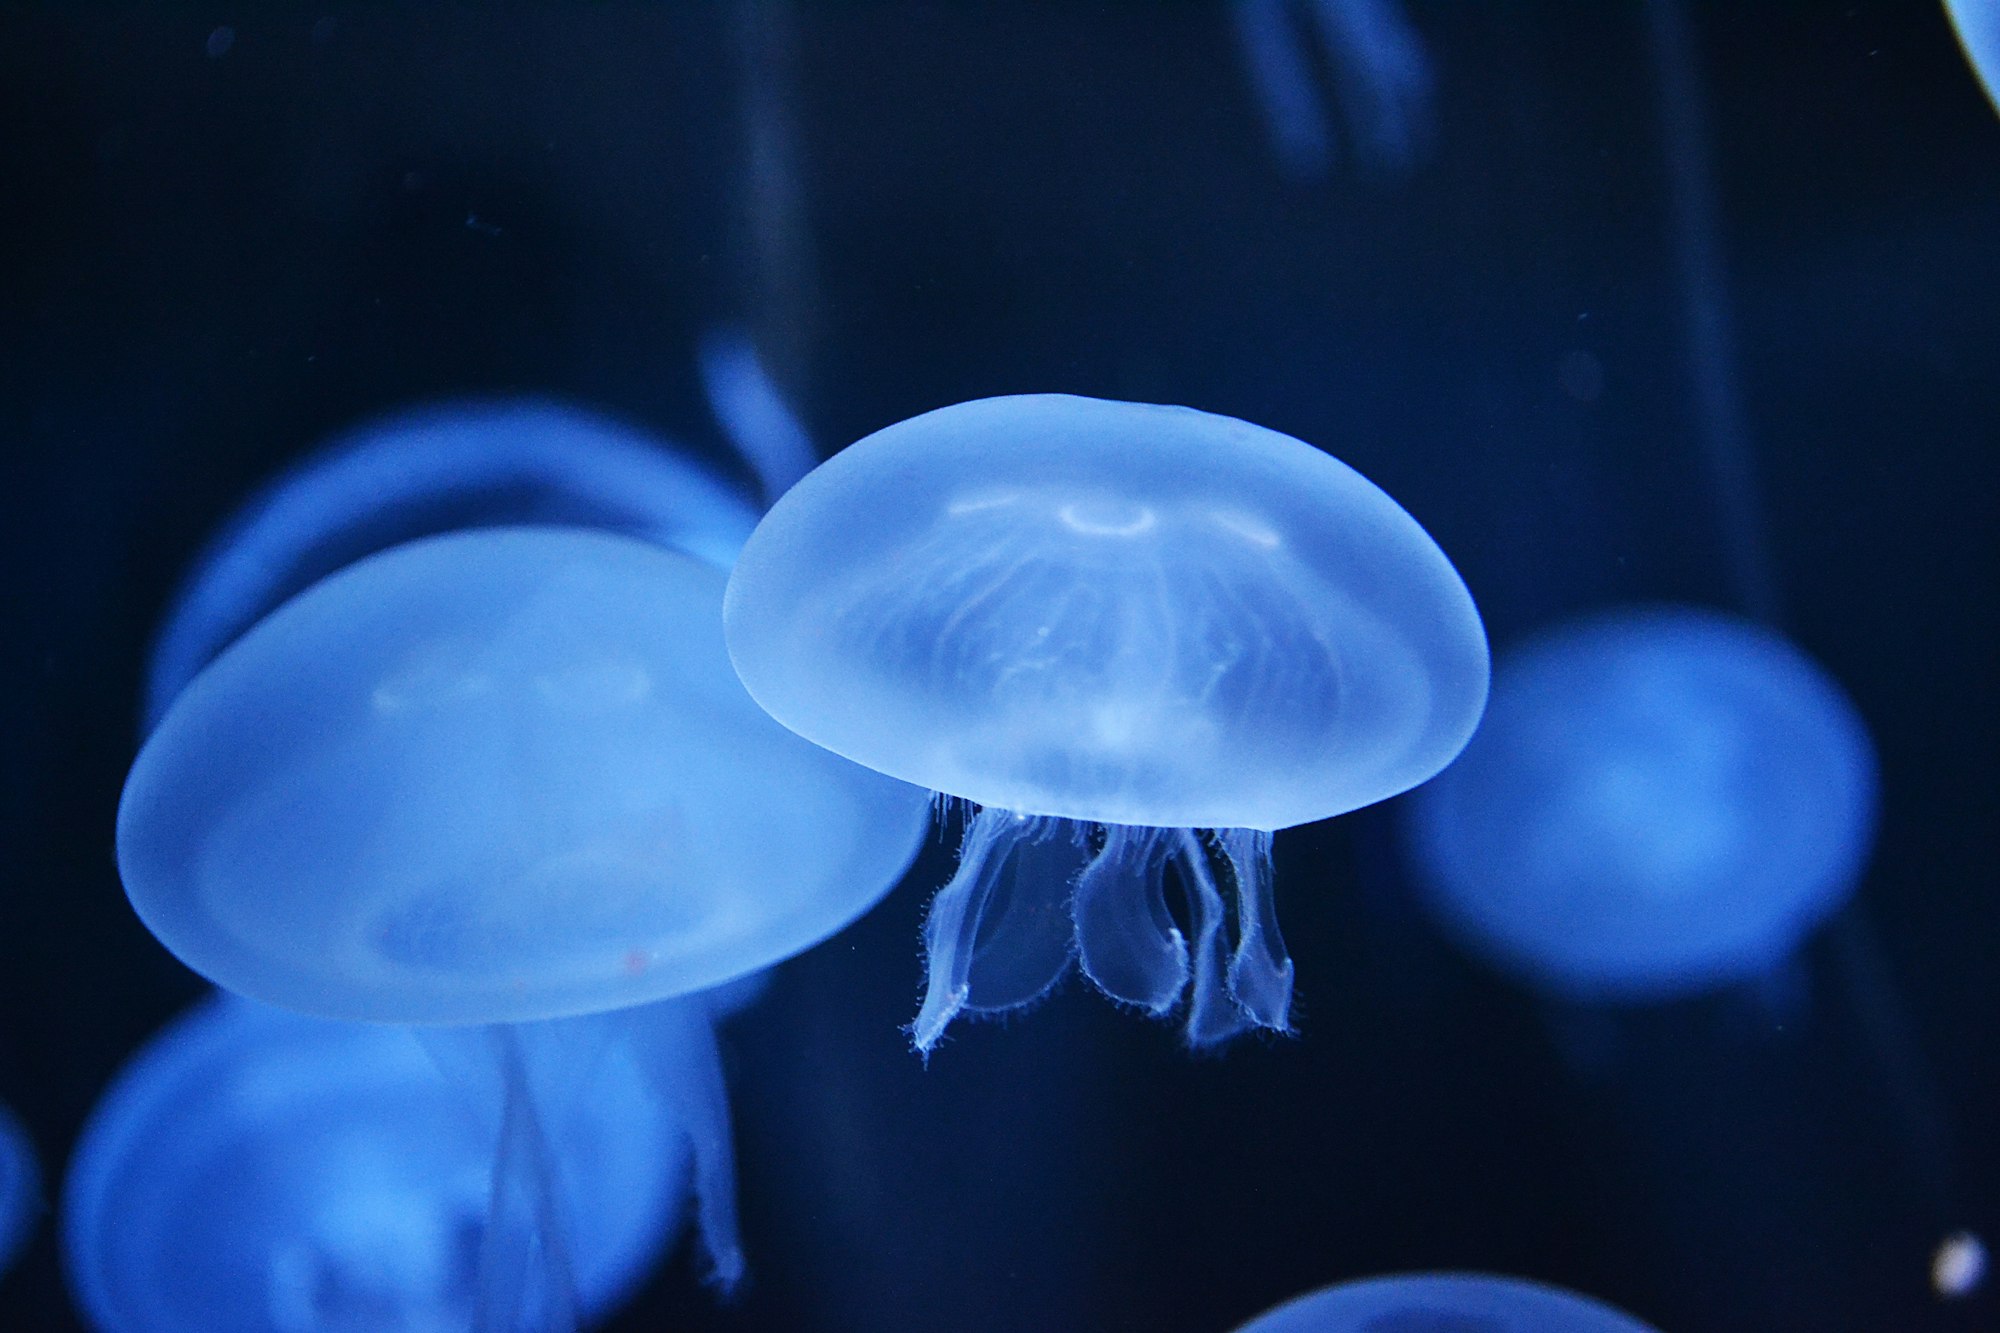 The immortal jellyfish and its tentacles